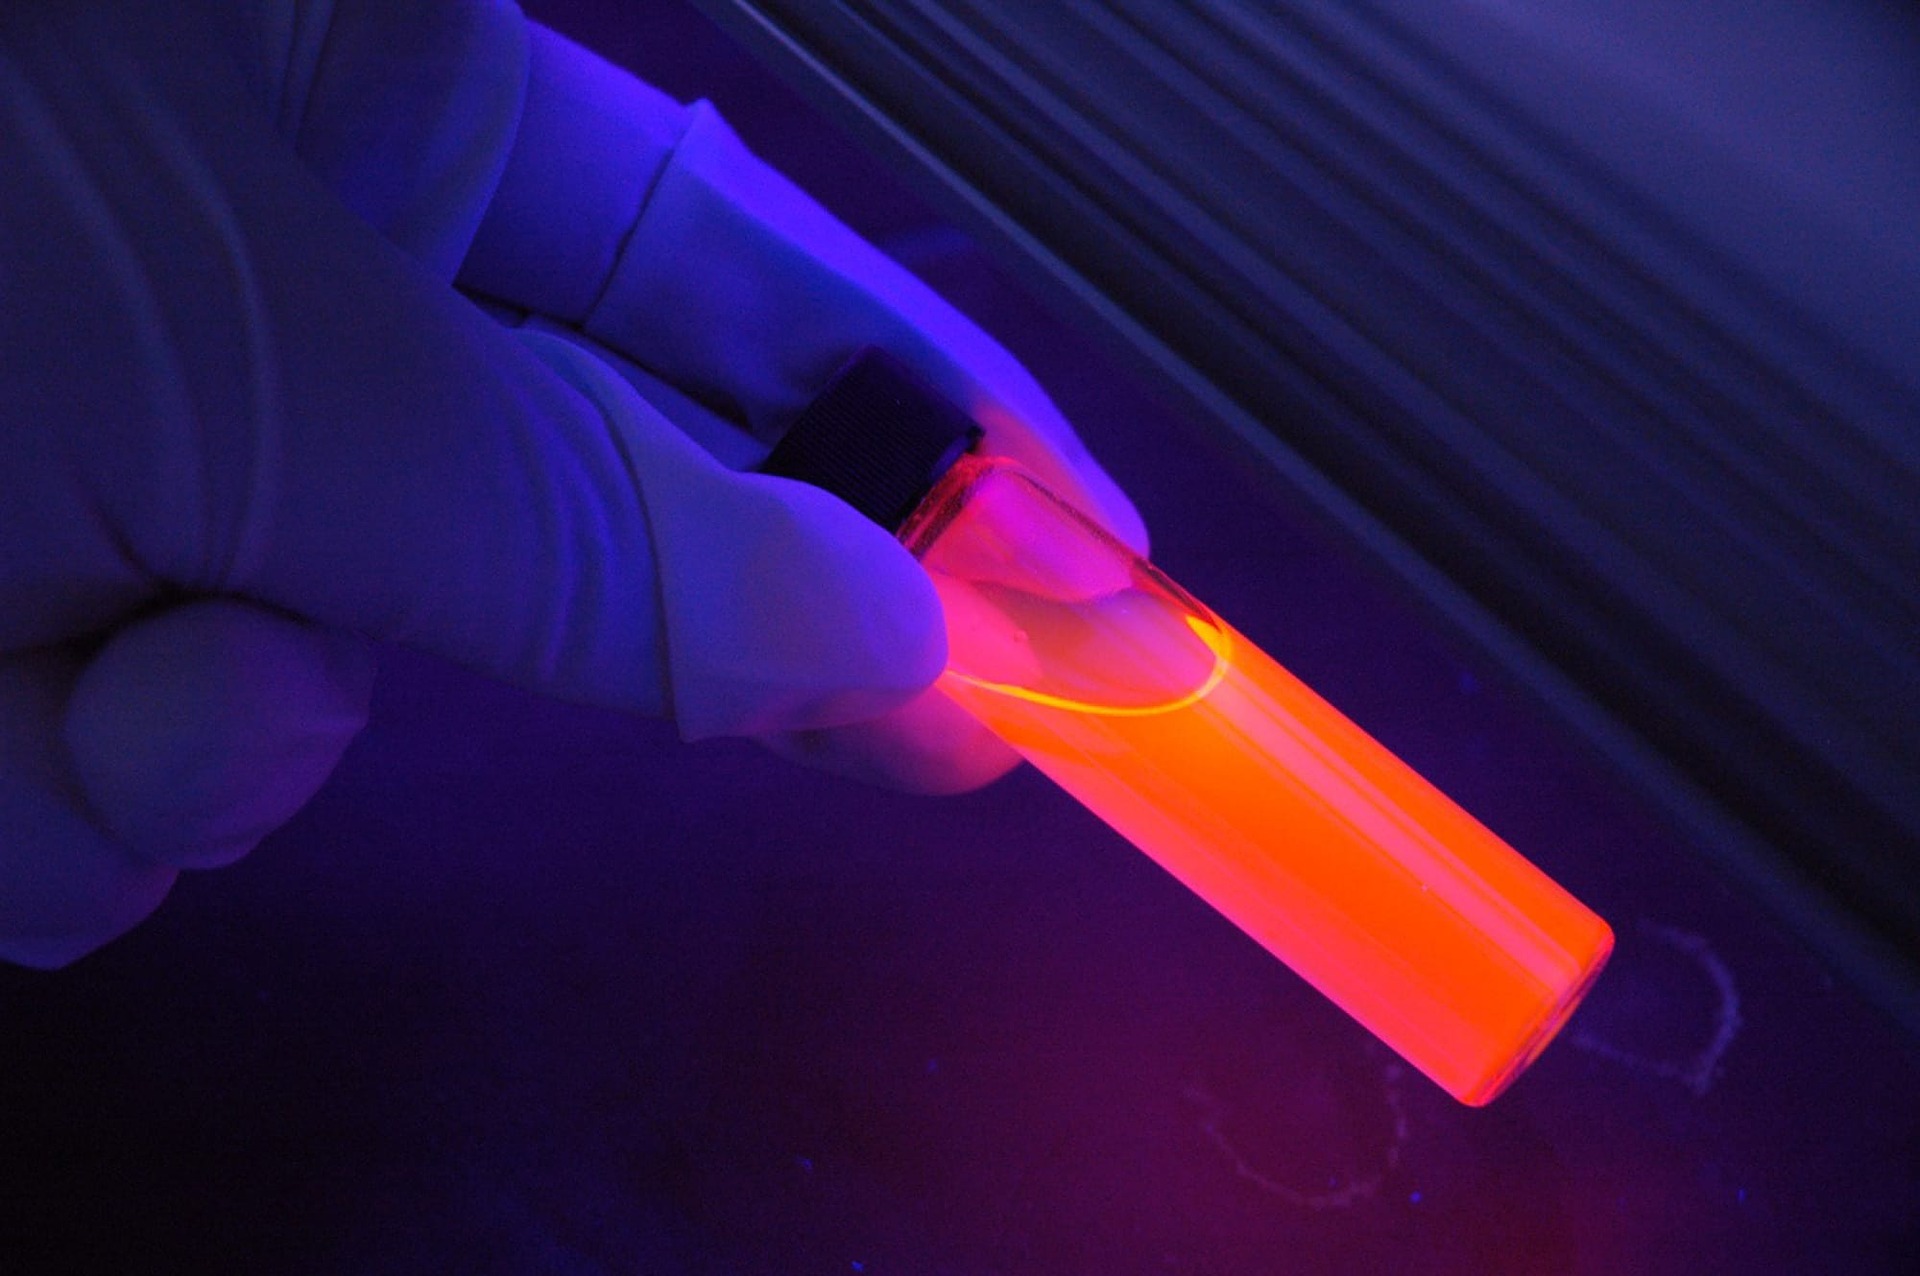 glowing orange test tube held in a gloved hand